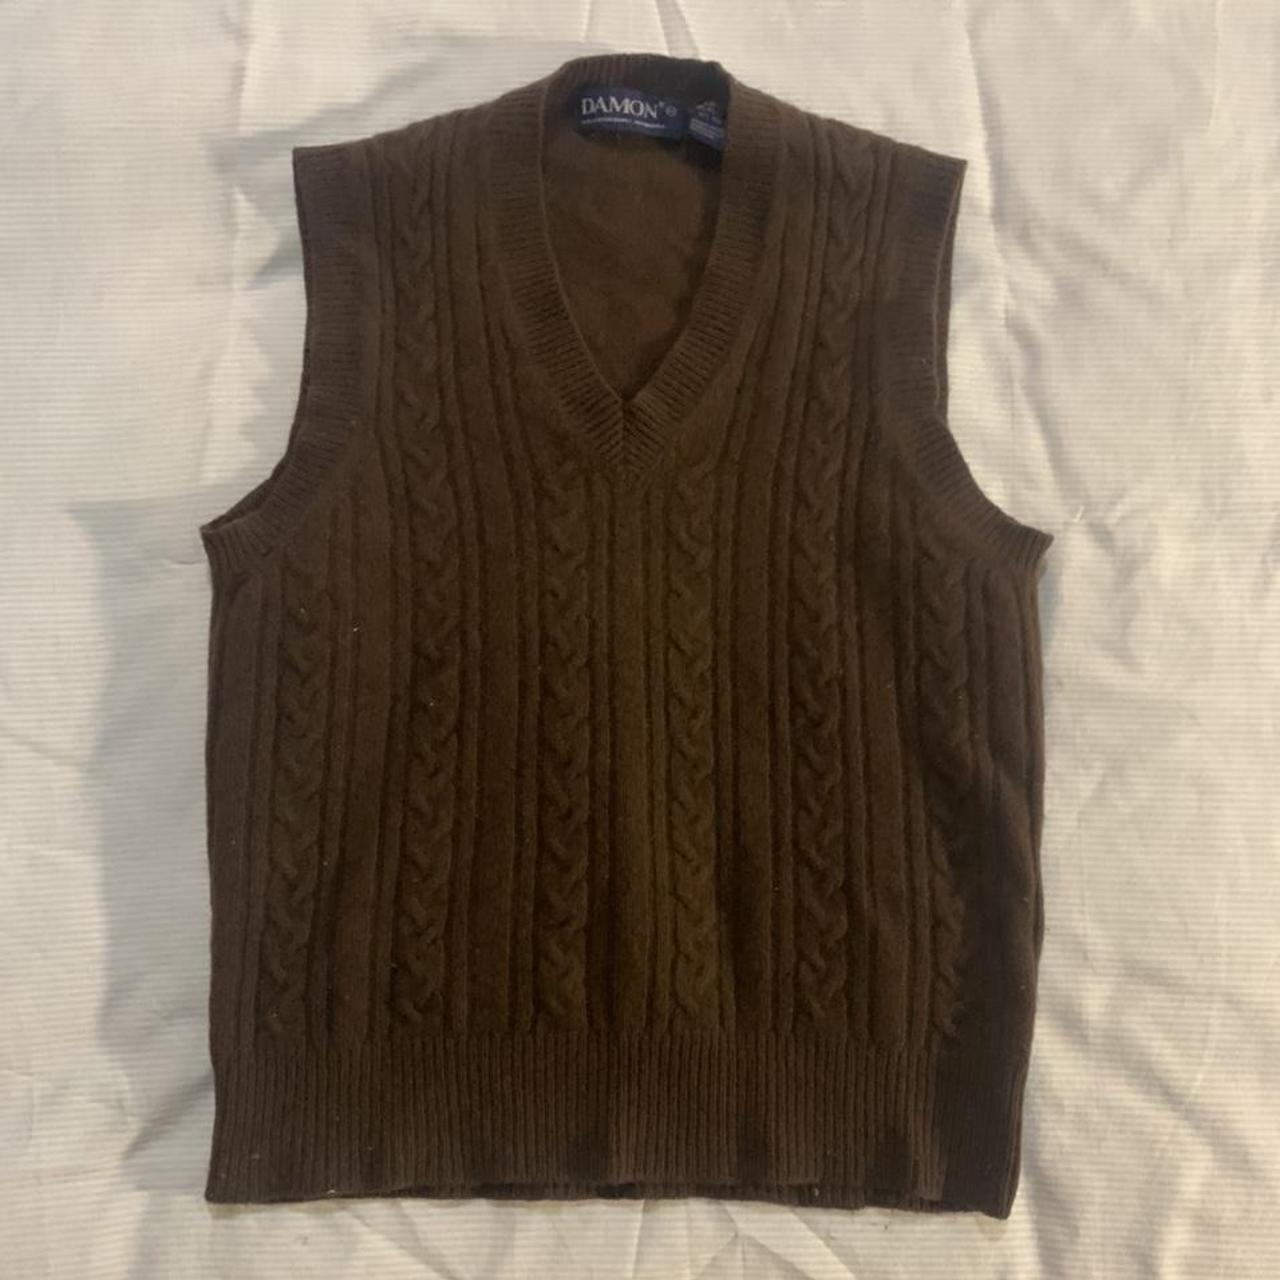 Brown wool sweater vest from Damon. Size M but fits... - Depop